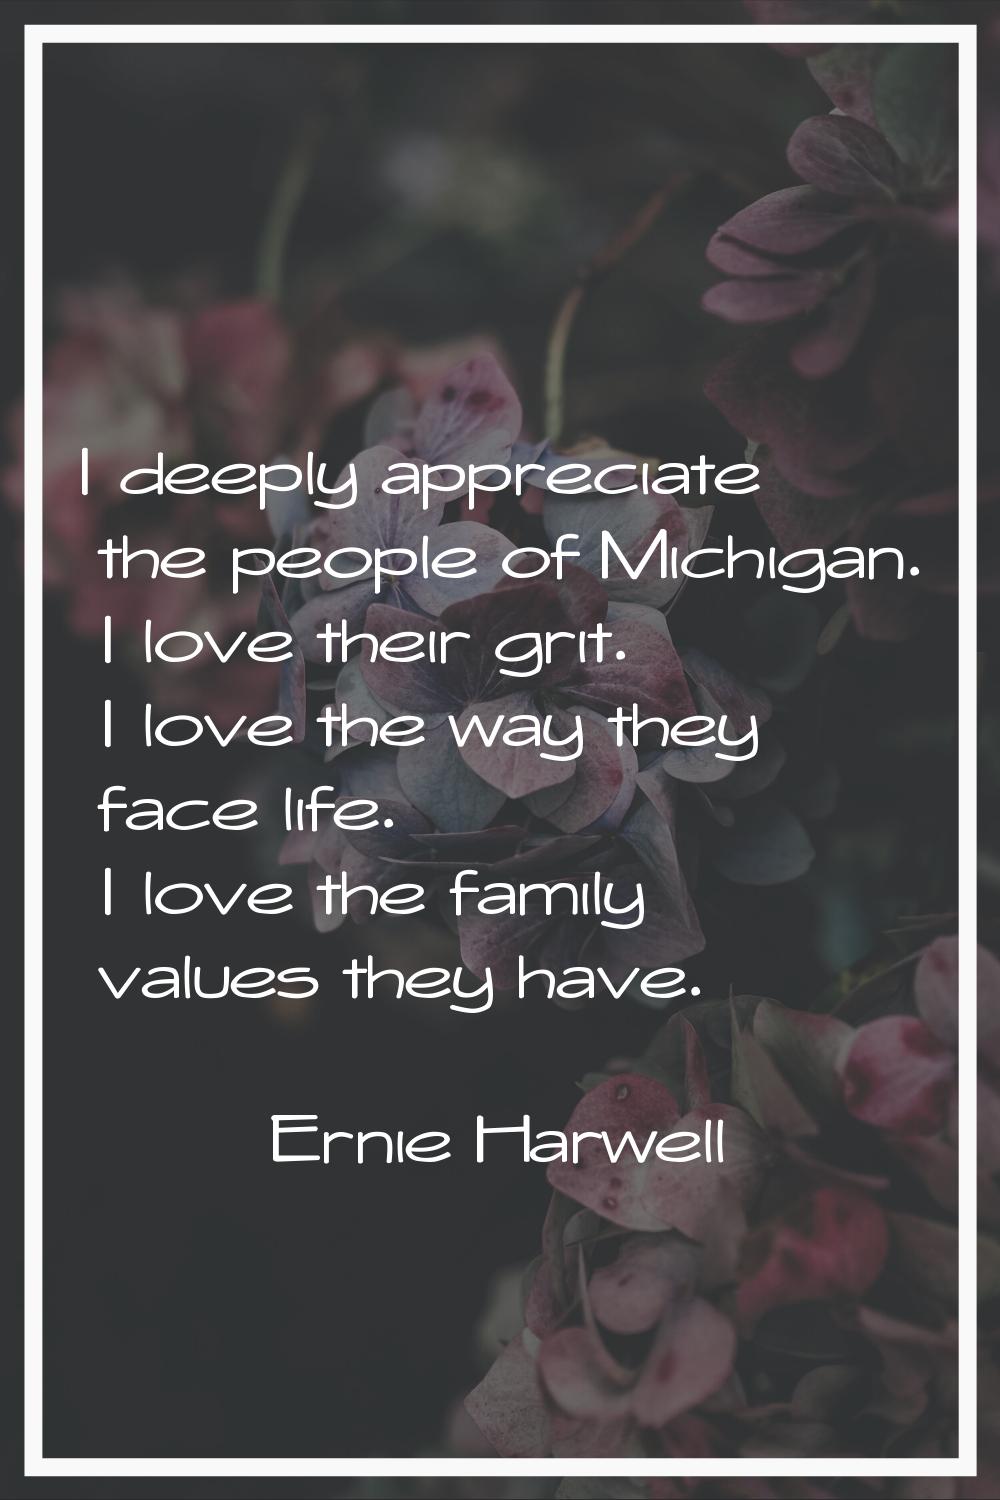 I deeply appreciate the people of Michigan. I love their grit. I love the way they face life. I lov